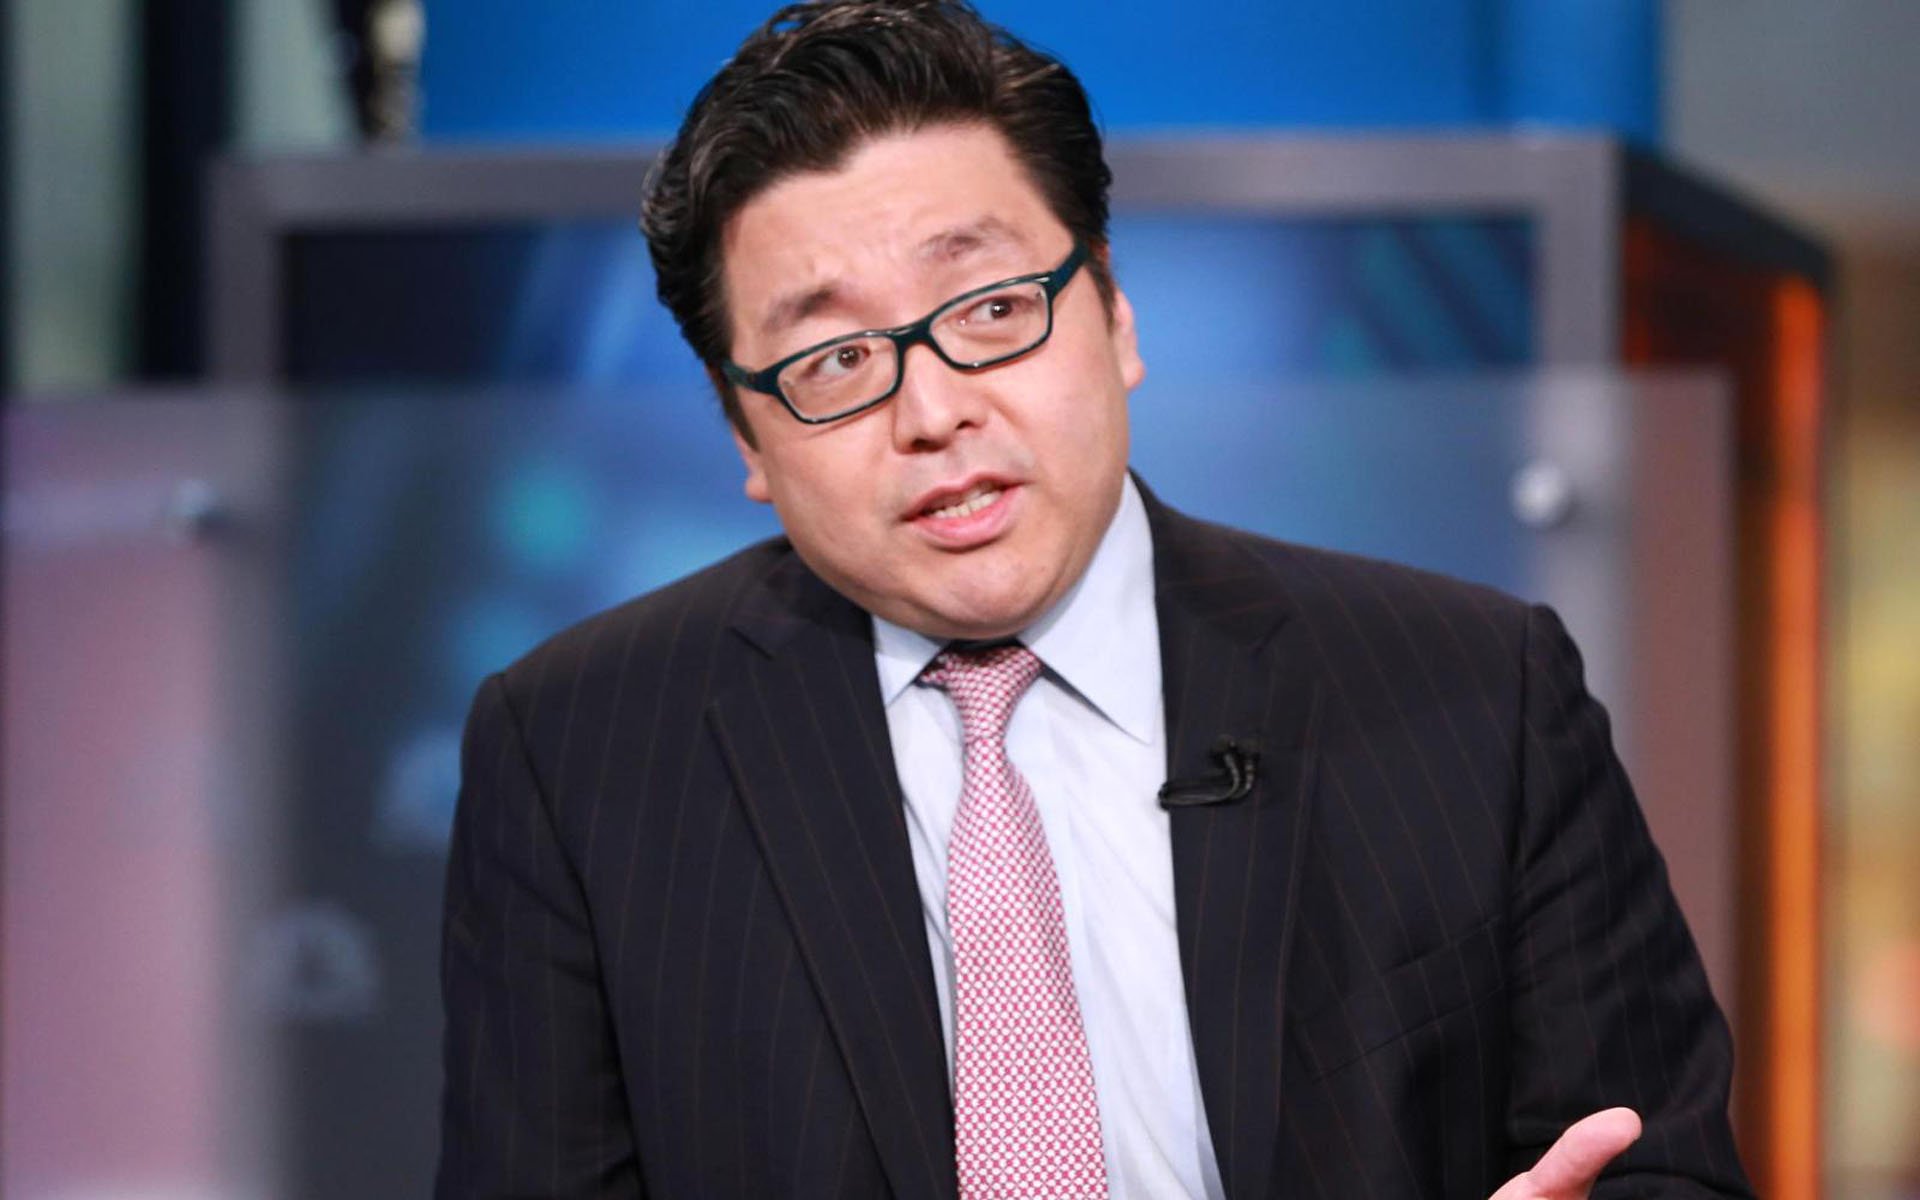 Bitcoin Price to touch $, in 12 months, Tom Lee says